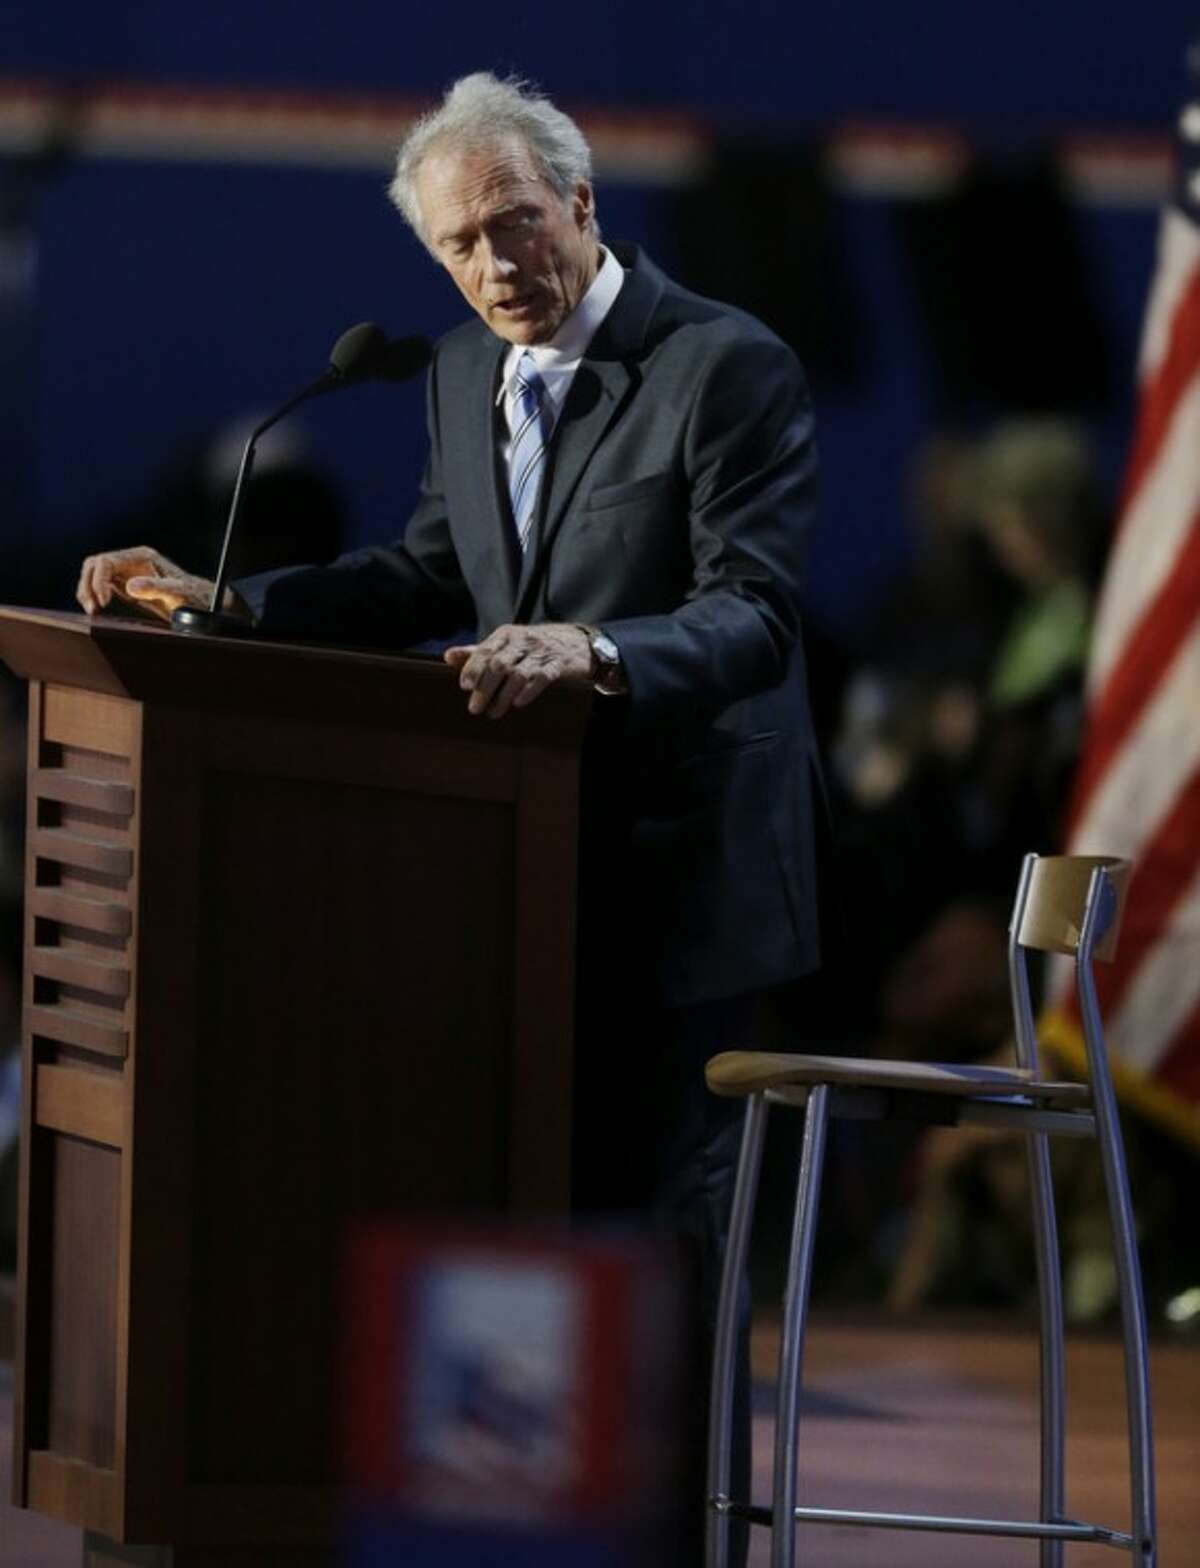 Actor Clint Eastwood speaks to an empty chair while addressed delegates during the Republican National Convention in Tampa, Fla., on Thursday, Aug. 30, 2012. (AP Photo/Lynne Sladky)